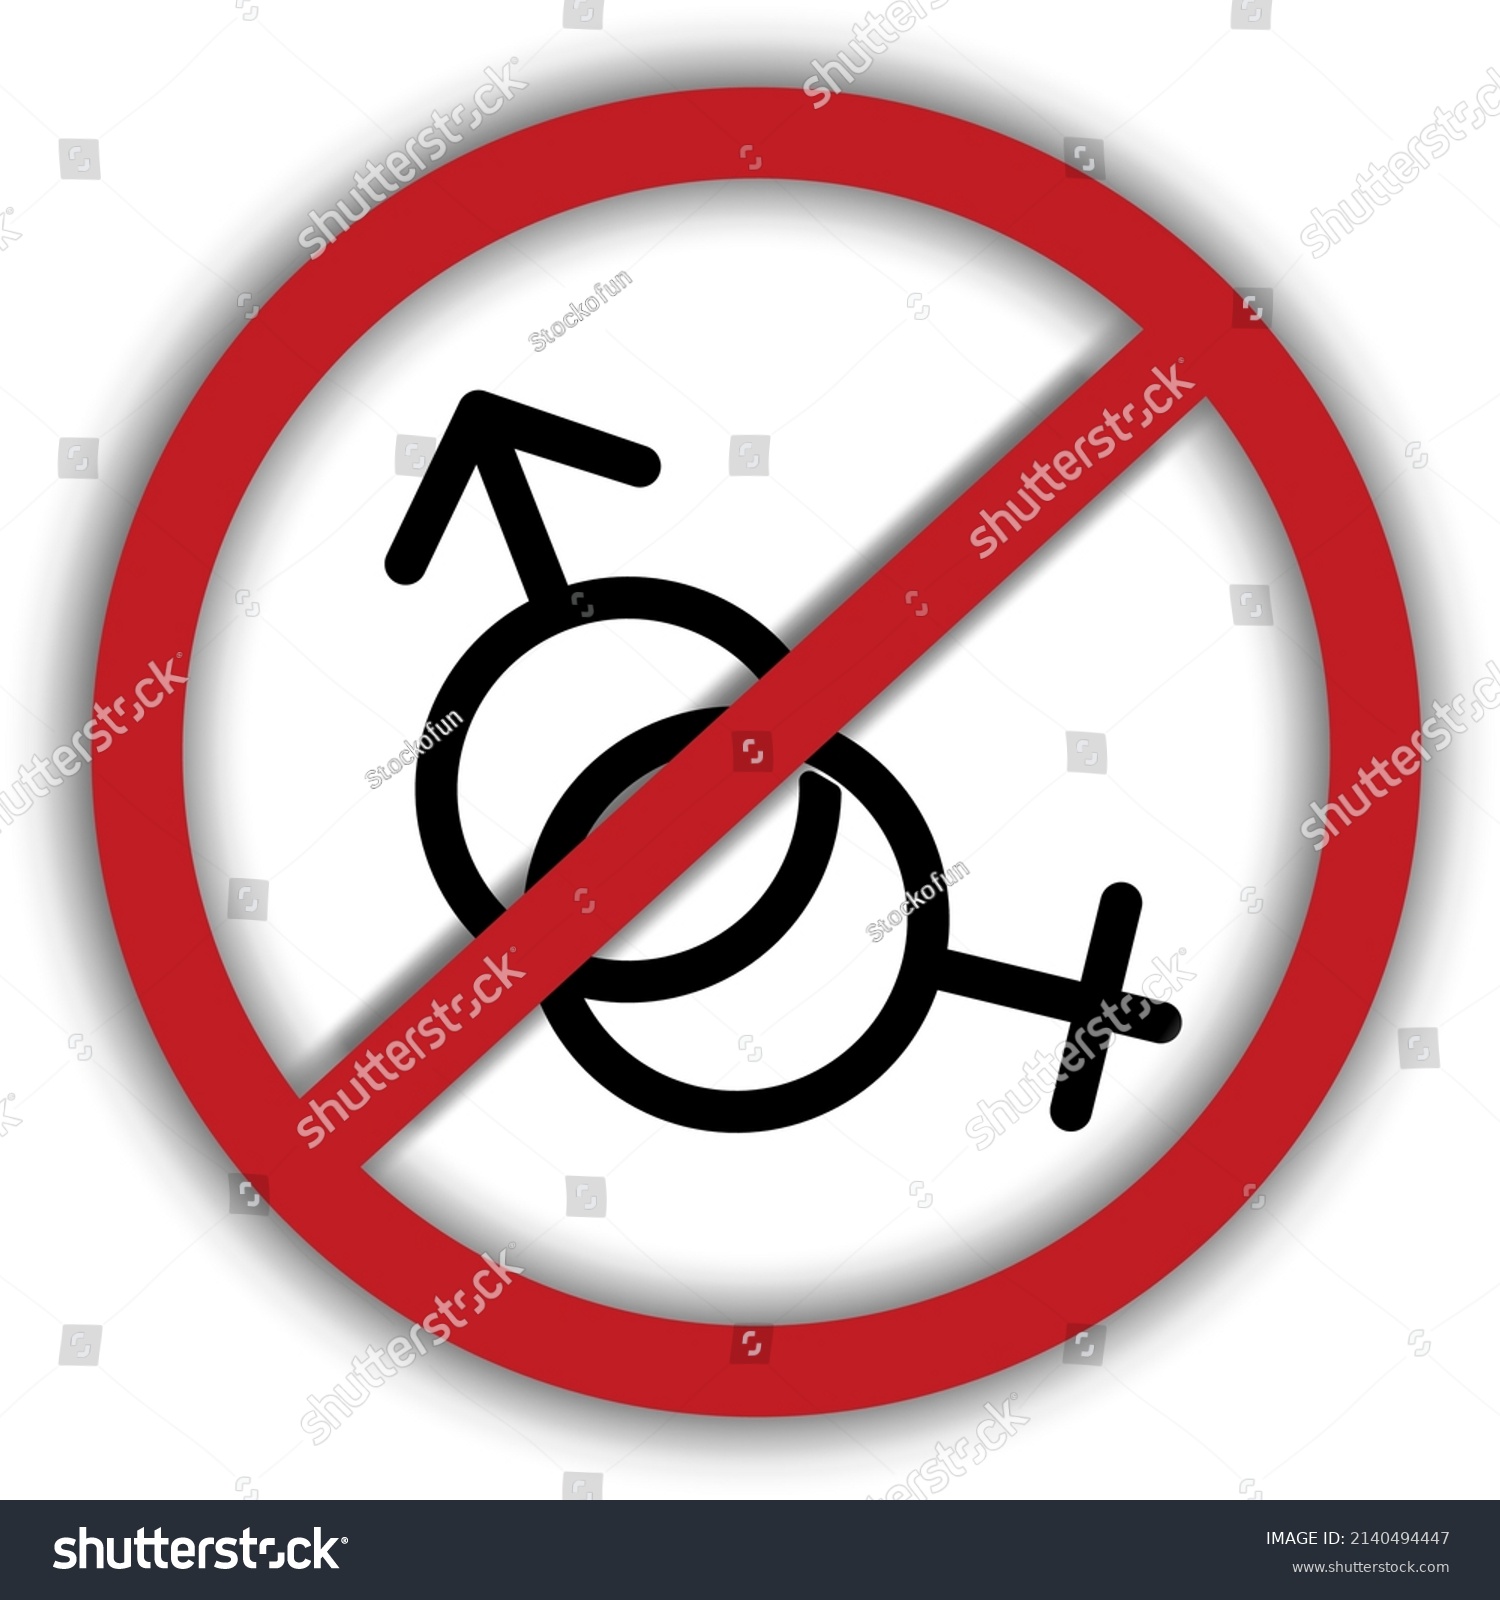 Vector Image Prohibition Sign Indicating No Stock Vector Royalty Free 2140494447 Shutterstock 